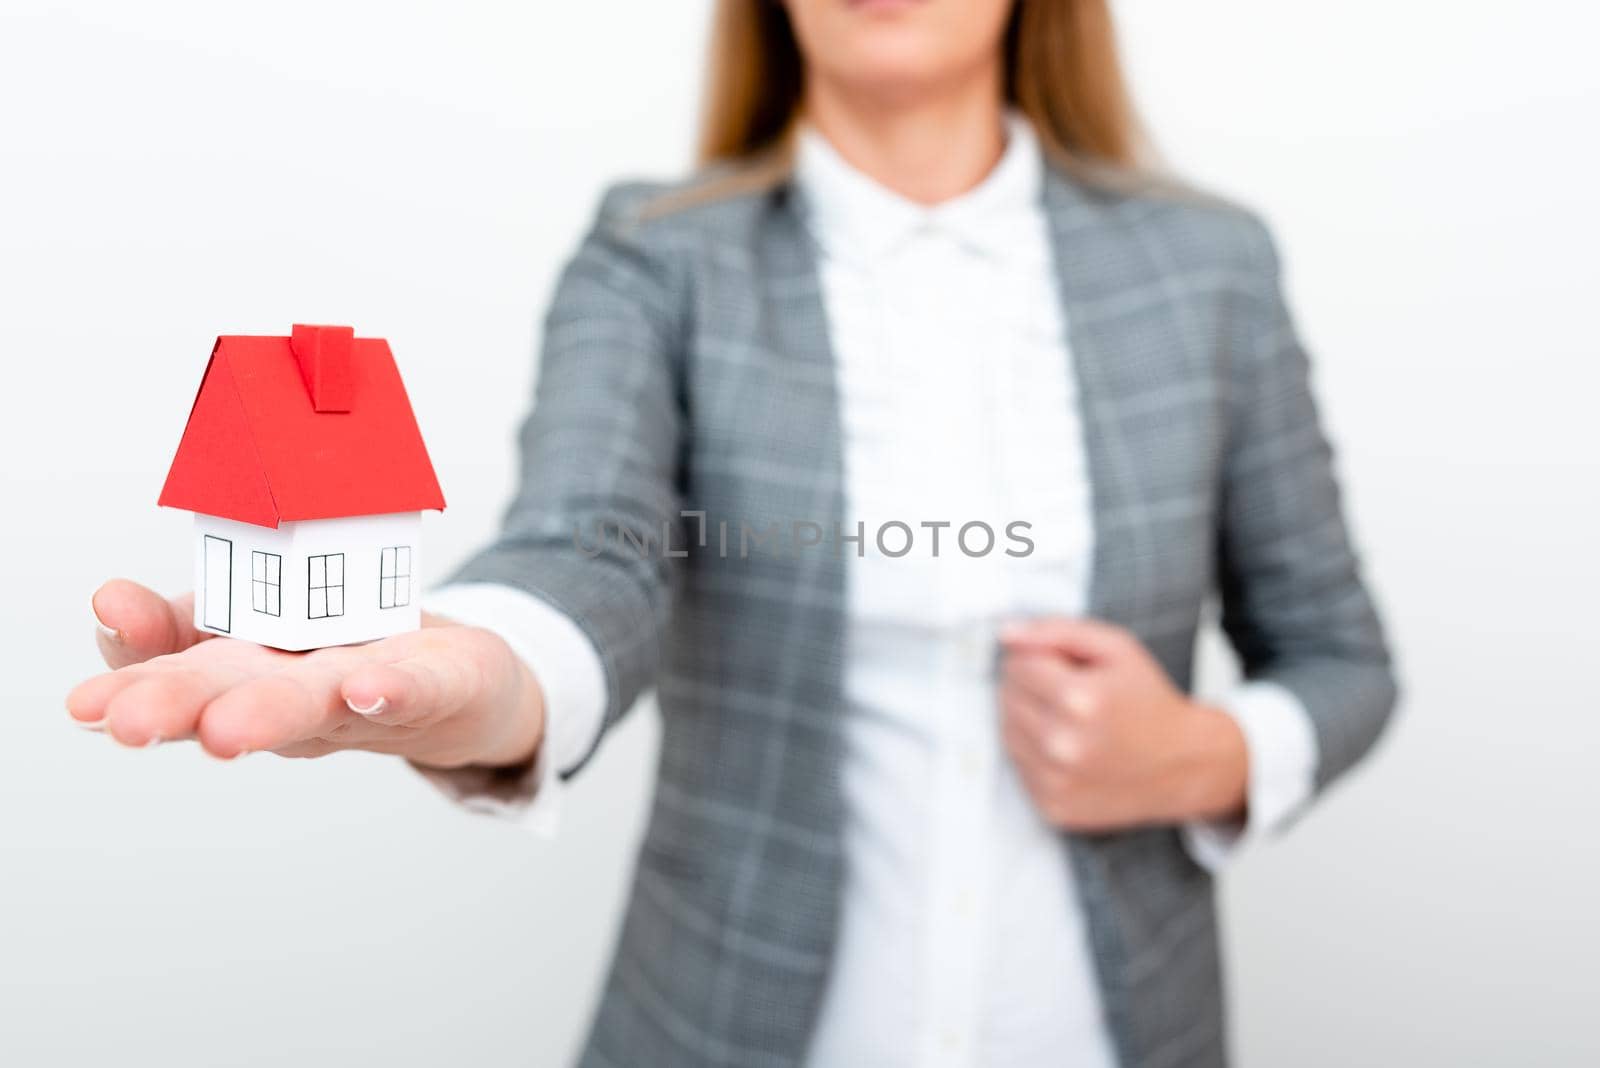 Holding Your new house in hands against spring green background. Real estate and healthy lifestyle concept.